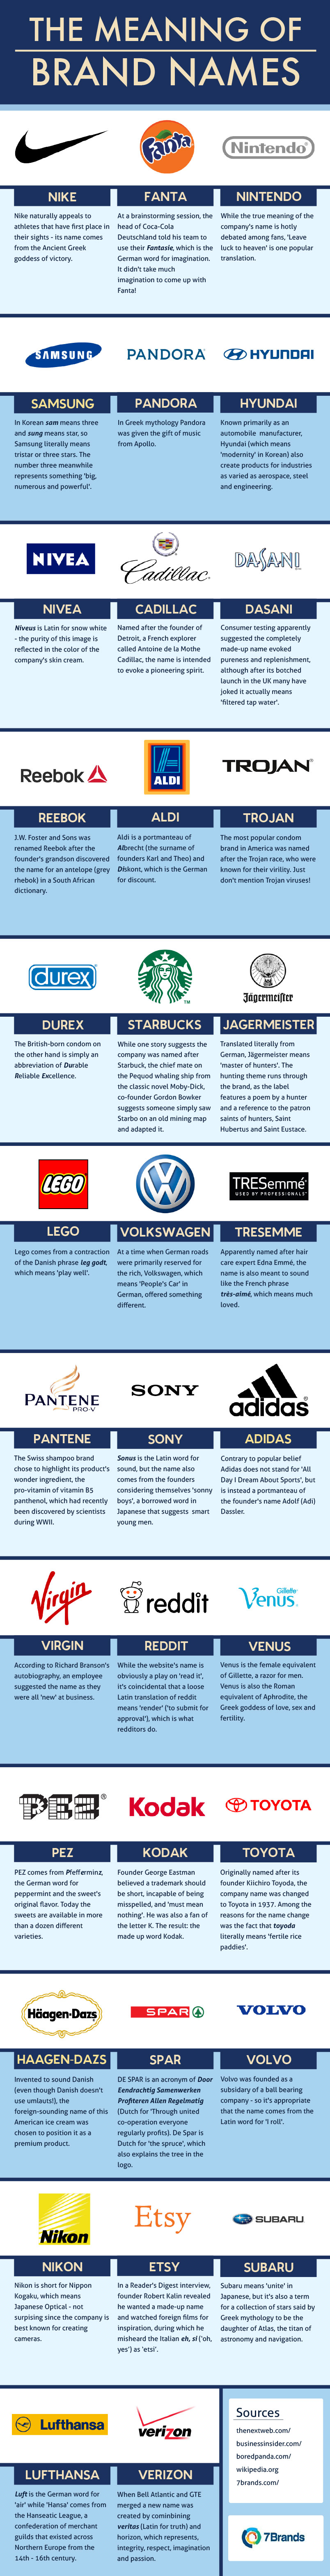 meaning-of-brand-names